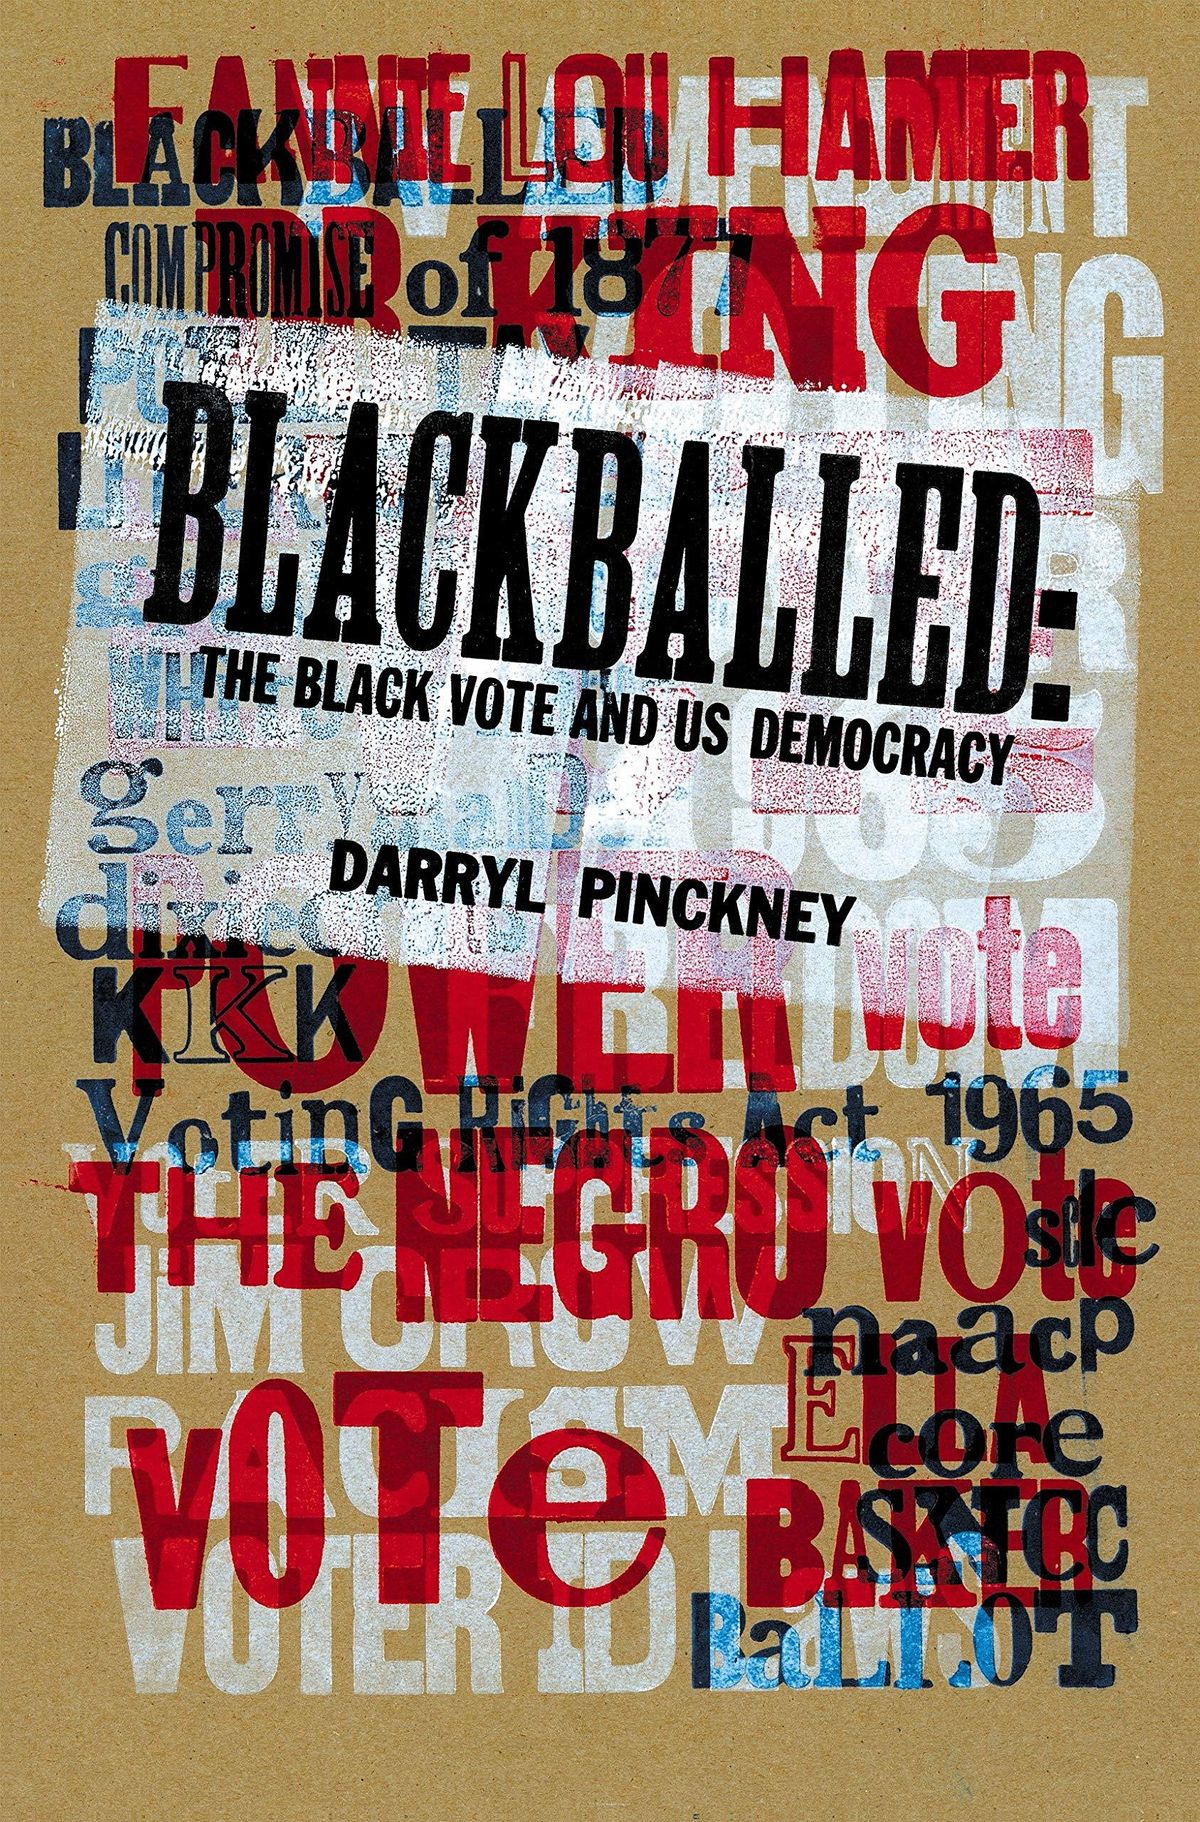 Power in Print - Blackballed: The Black Vote and US Democracy (Book Talk)